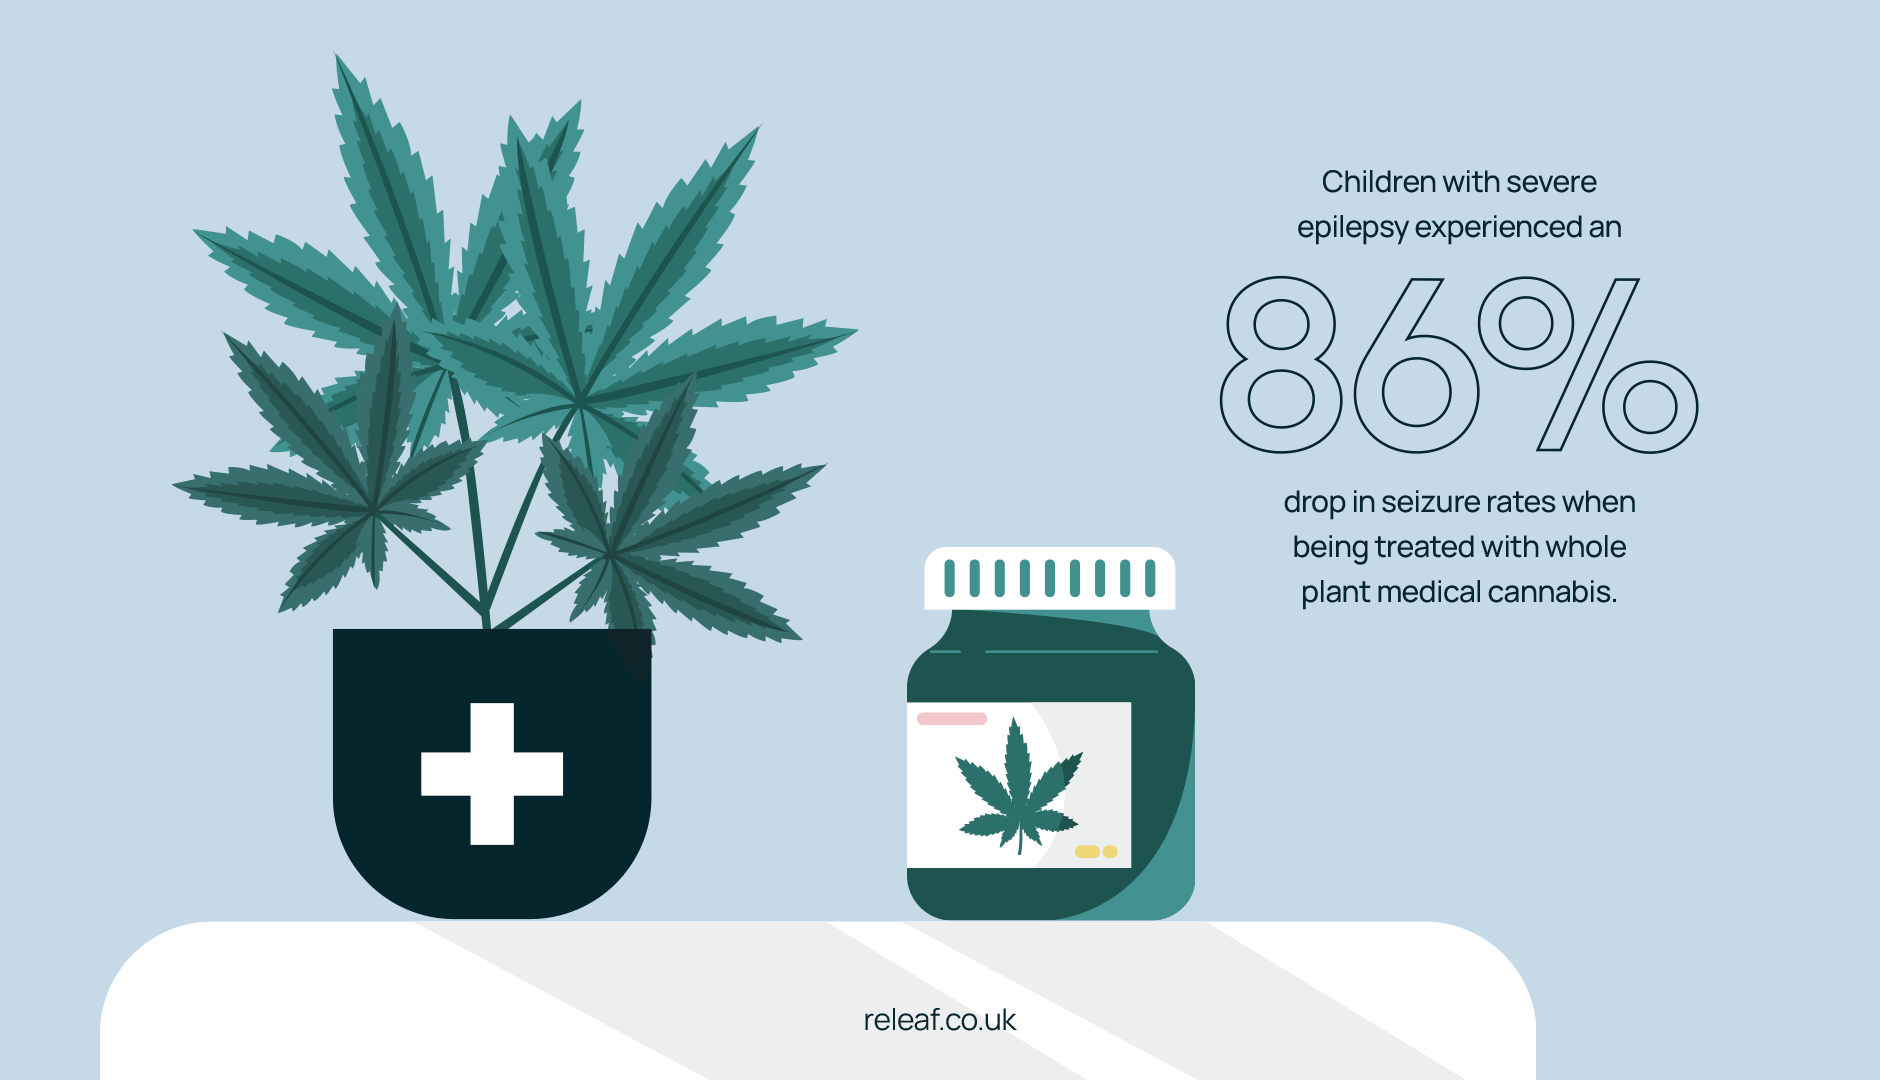 Children with severe epilepsy experienced an 86% drop in seizure rates when being treated with whole plant medical cannabis. 